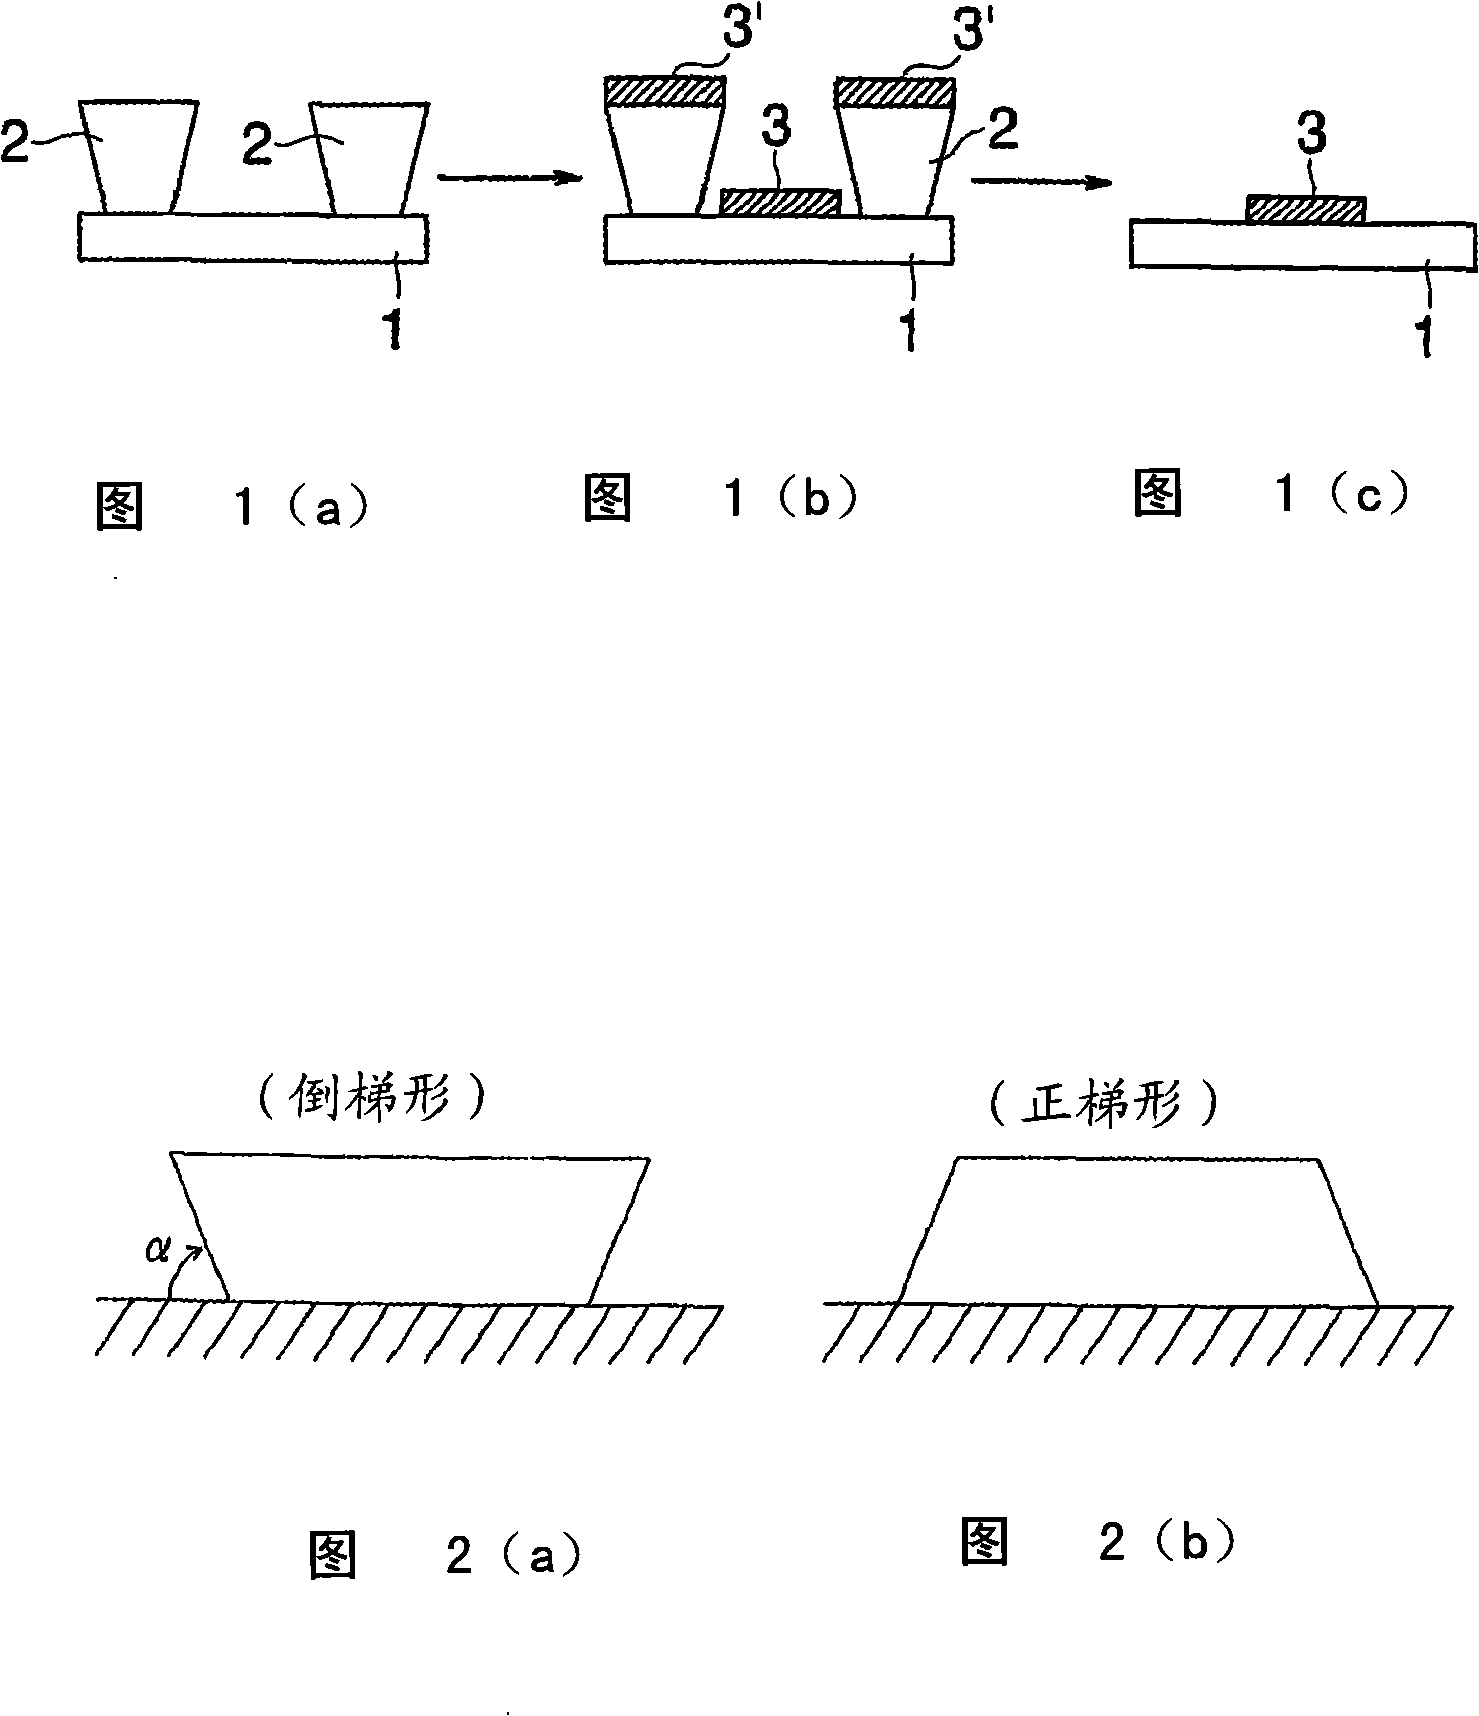 Process for producing substrate with metal wiring